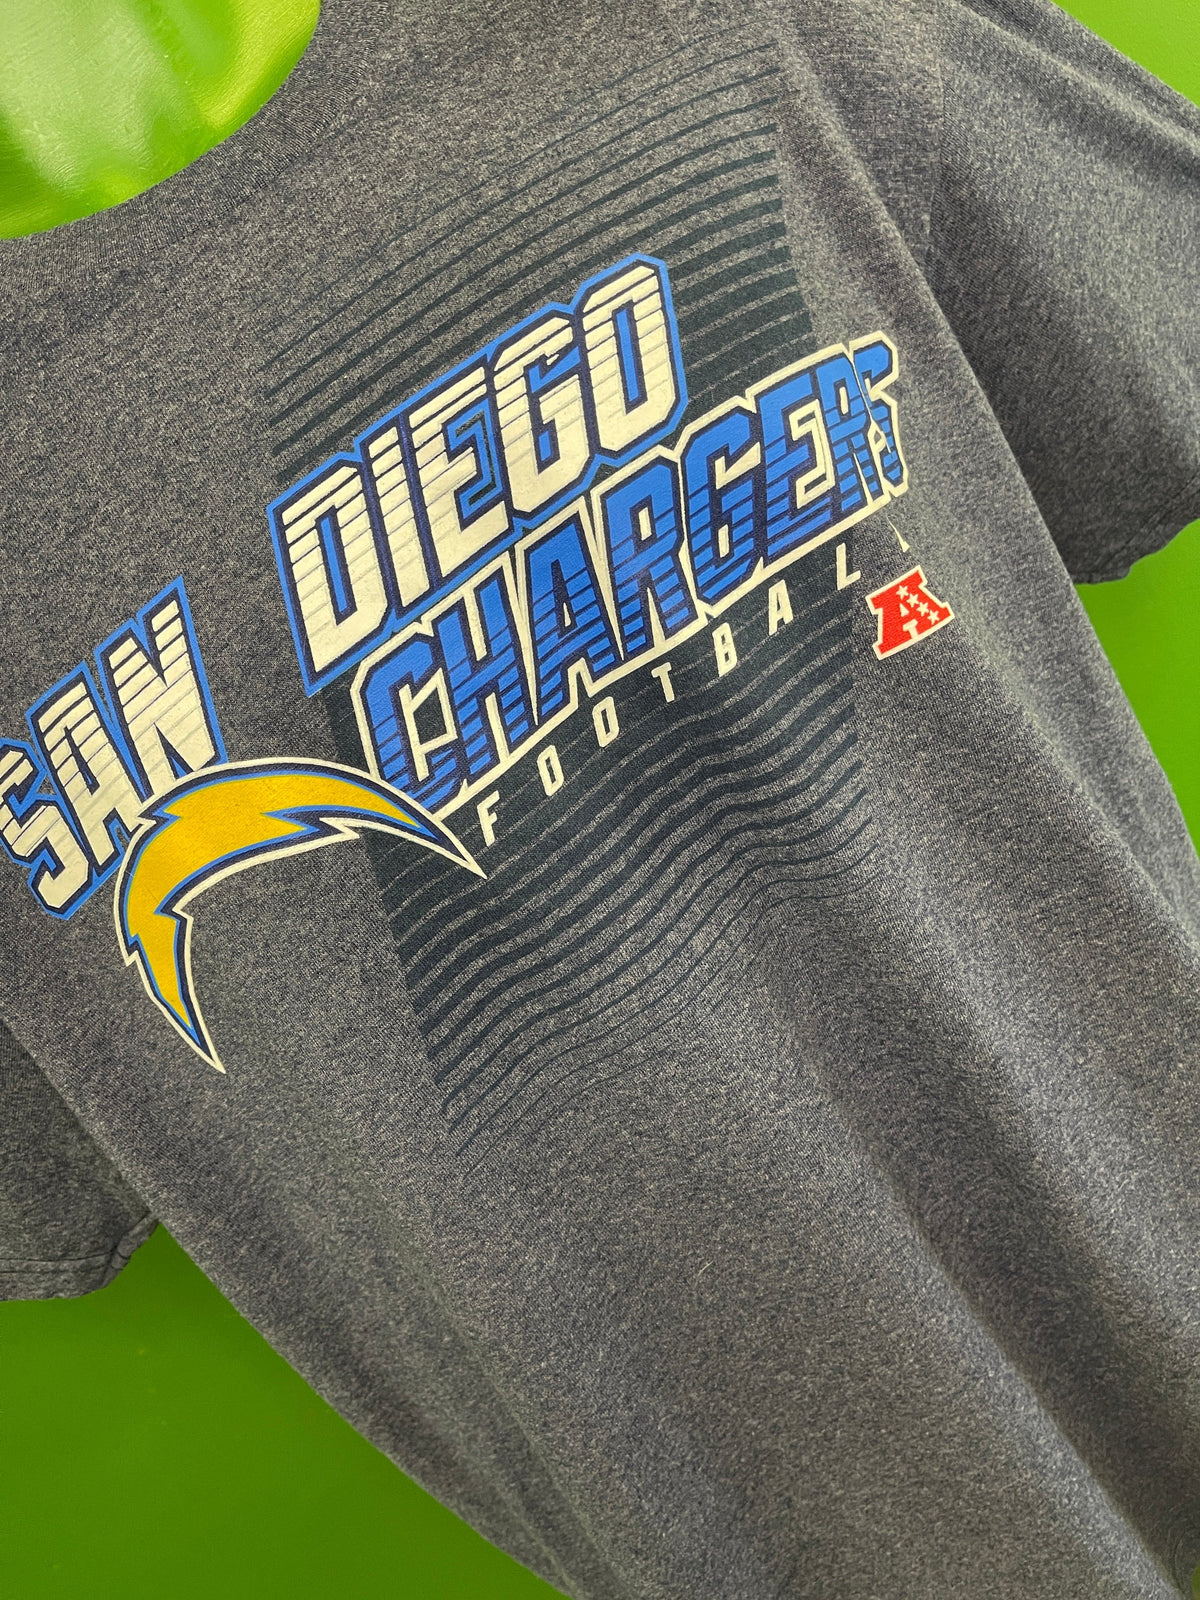 NFL Los Angeles (San Diego) Chargers Heathered Blue T-Shirt Men's Large